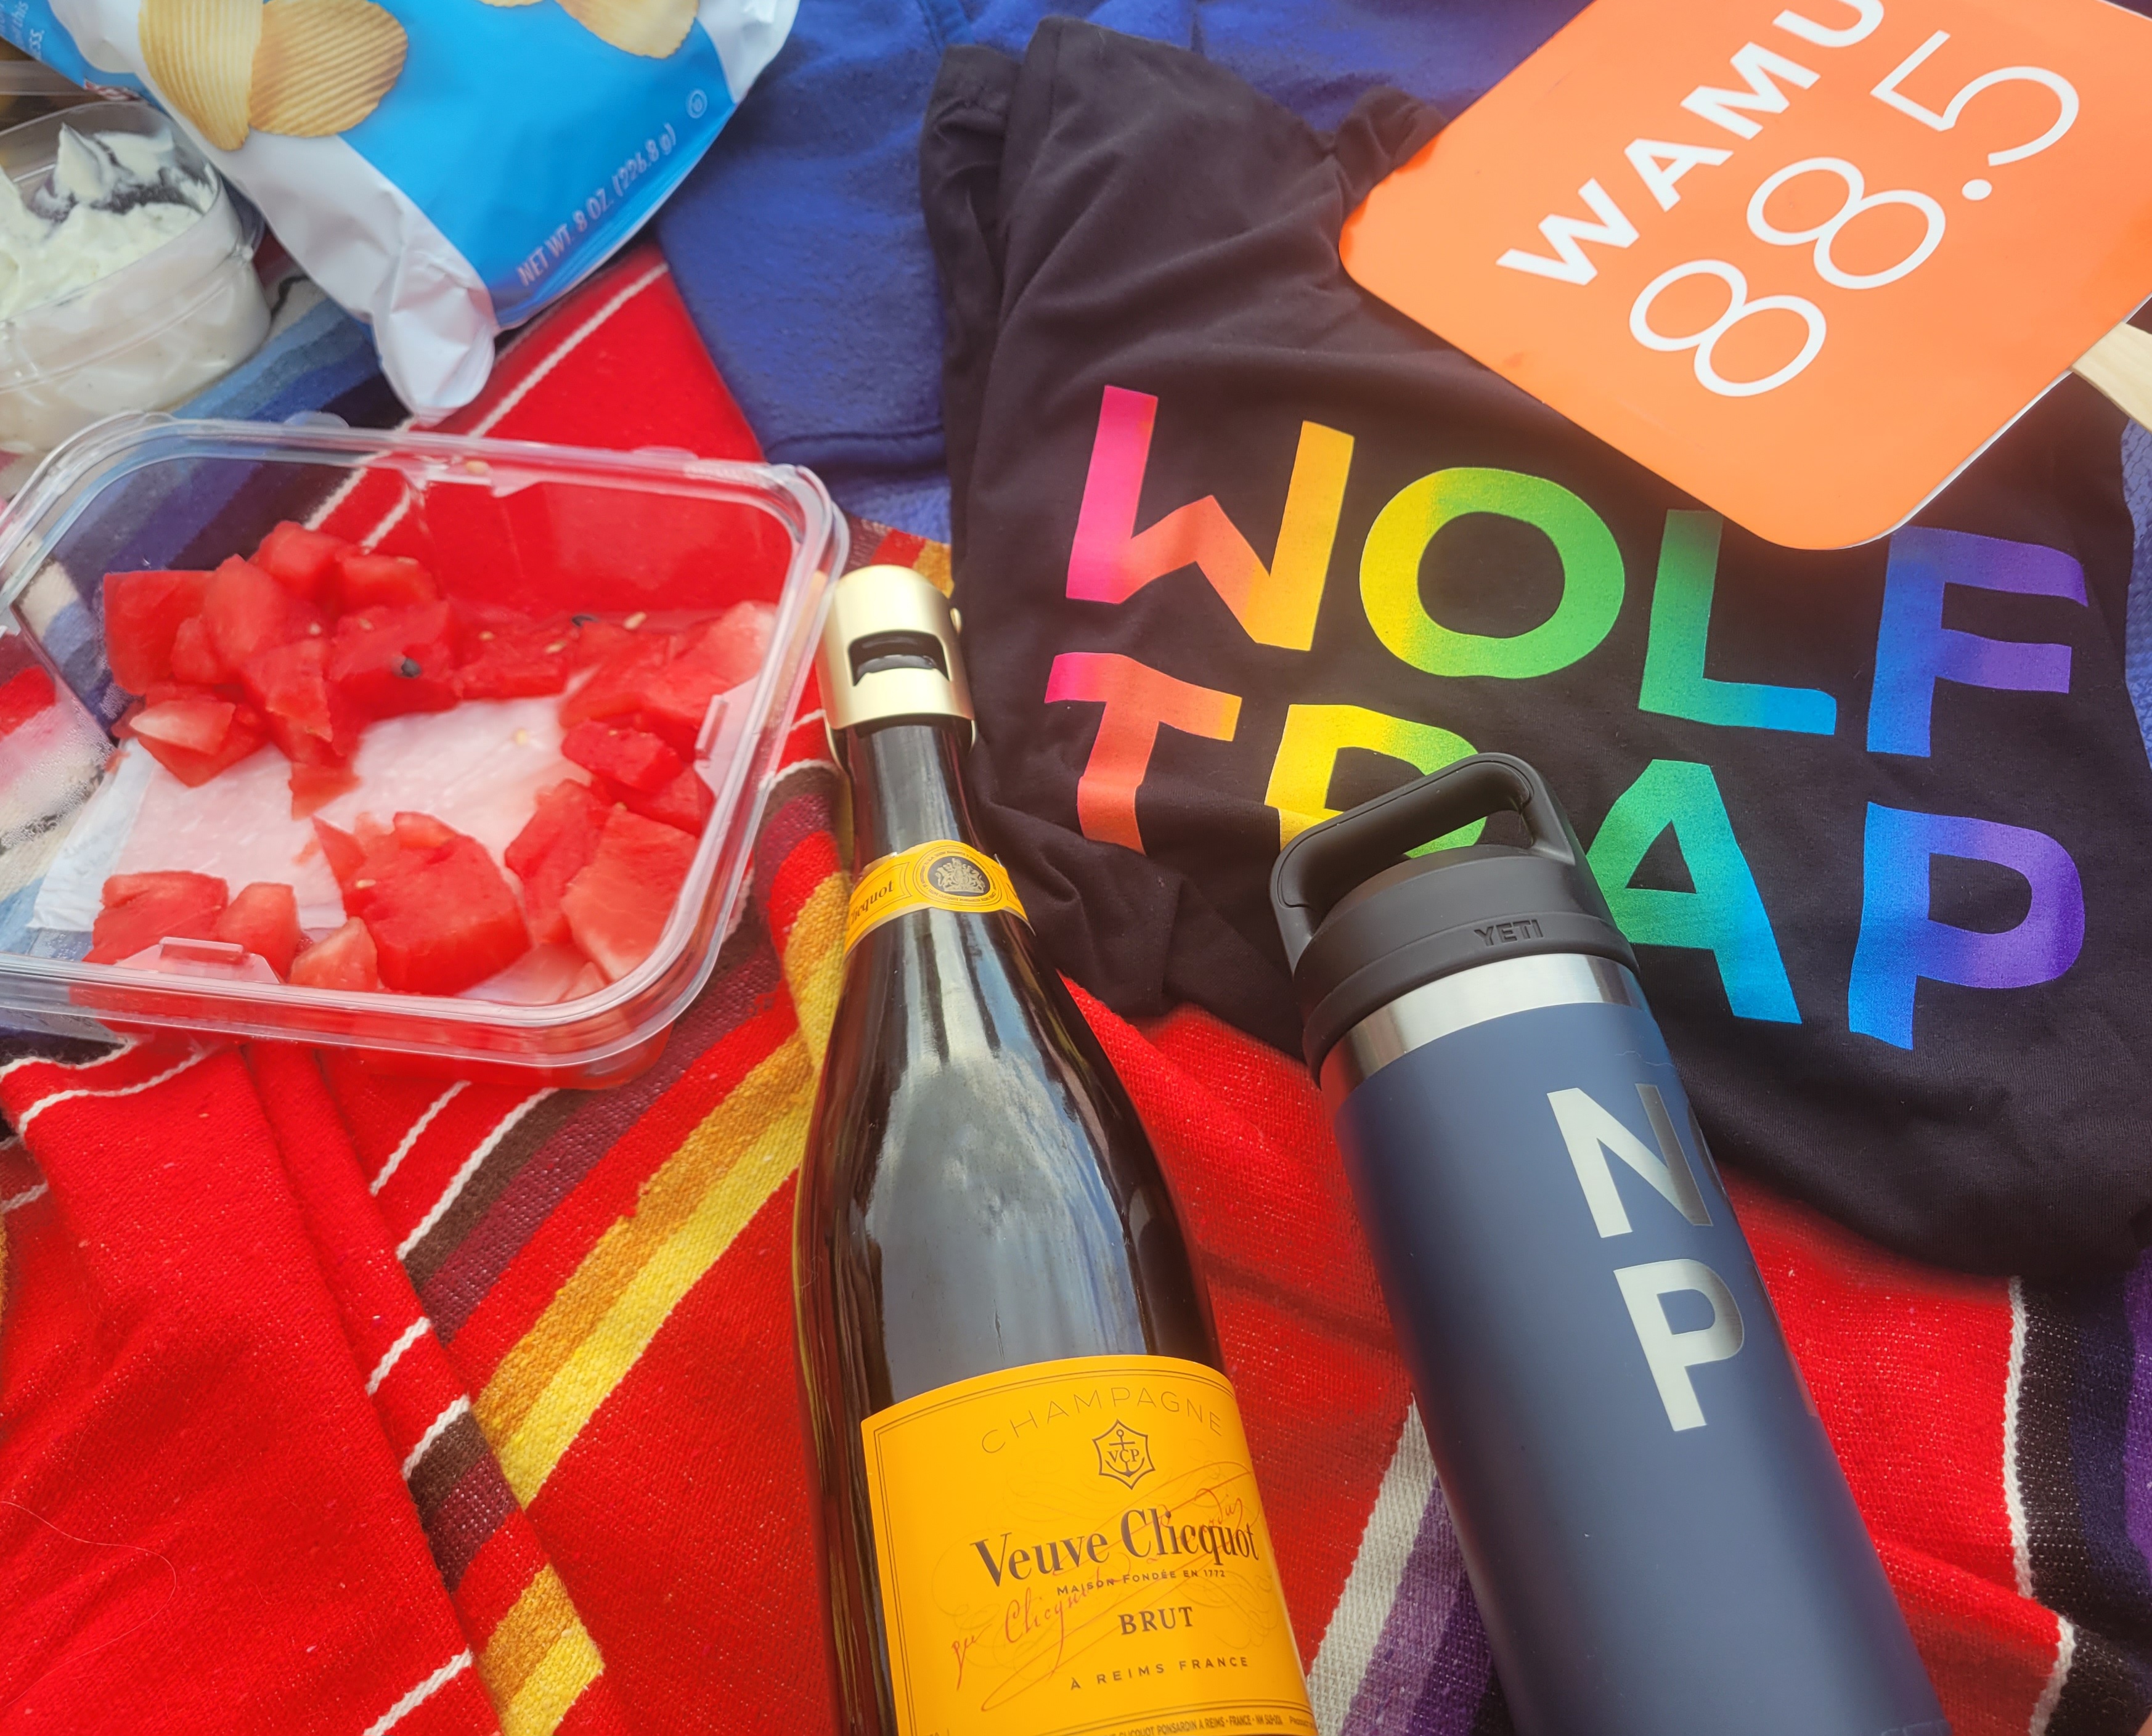 A champagne bottle, a shirt, a fan, and some watermelon on a picnic blanket.